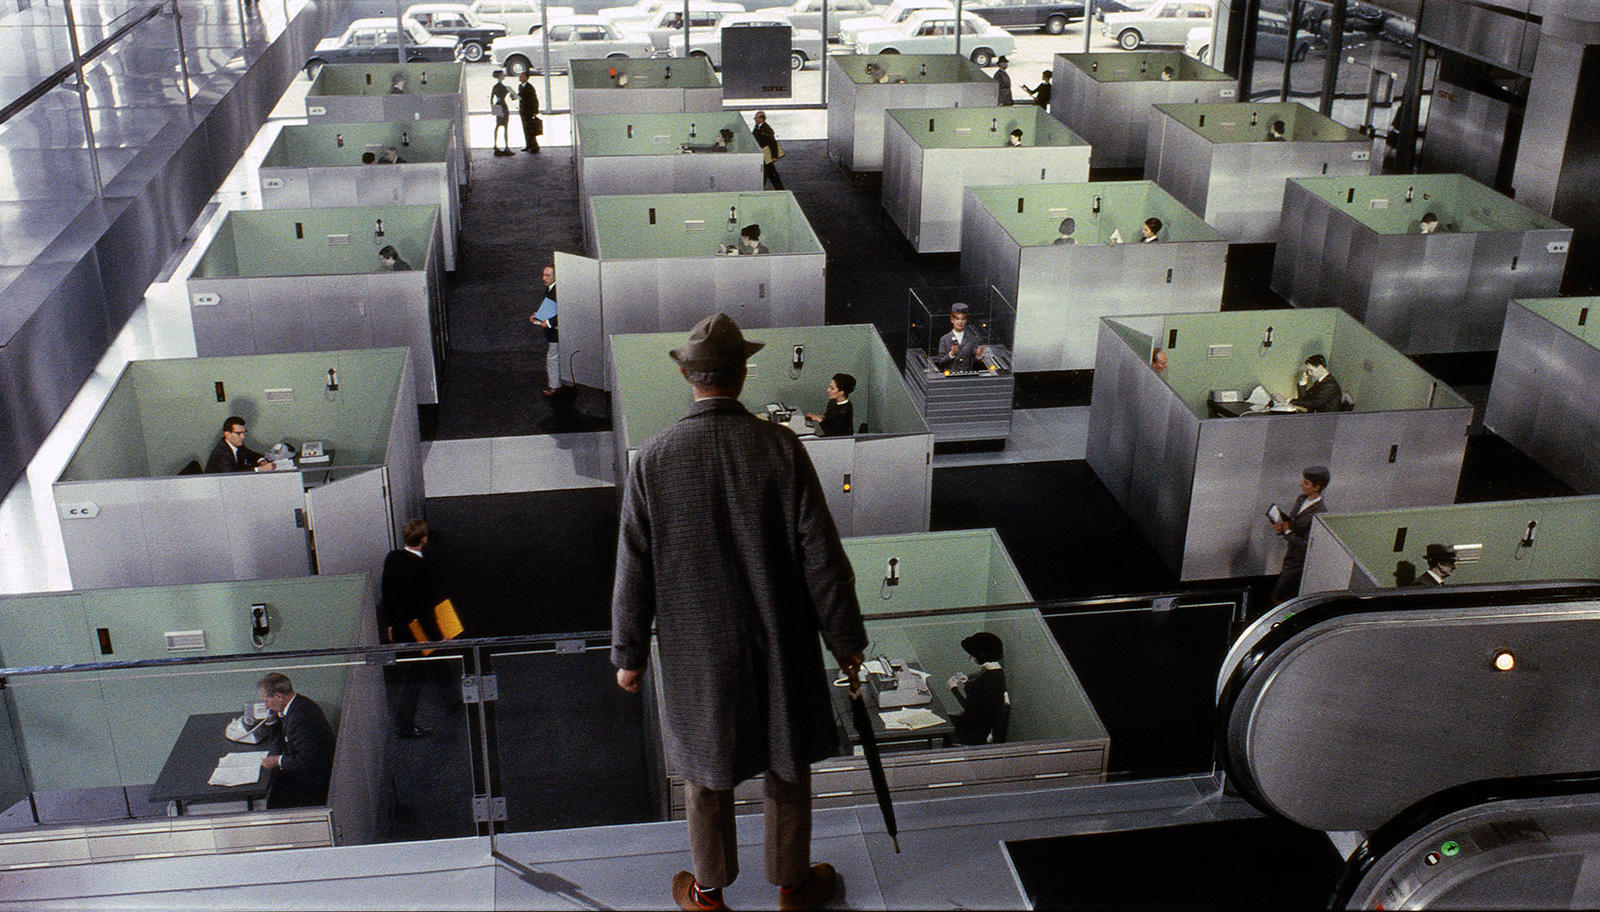 Jacques Tati's Playtime © 1967 / Les Films de Mon Oncle – Specta Films CEPEC. All rights reserved